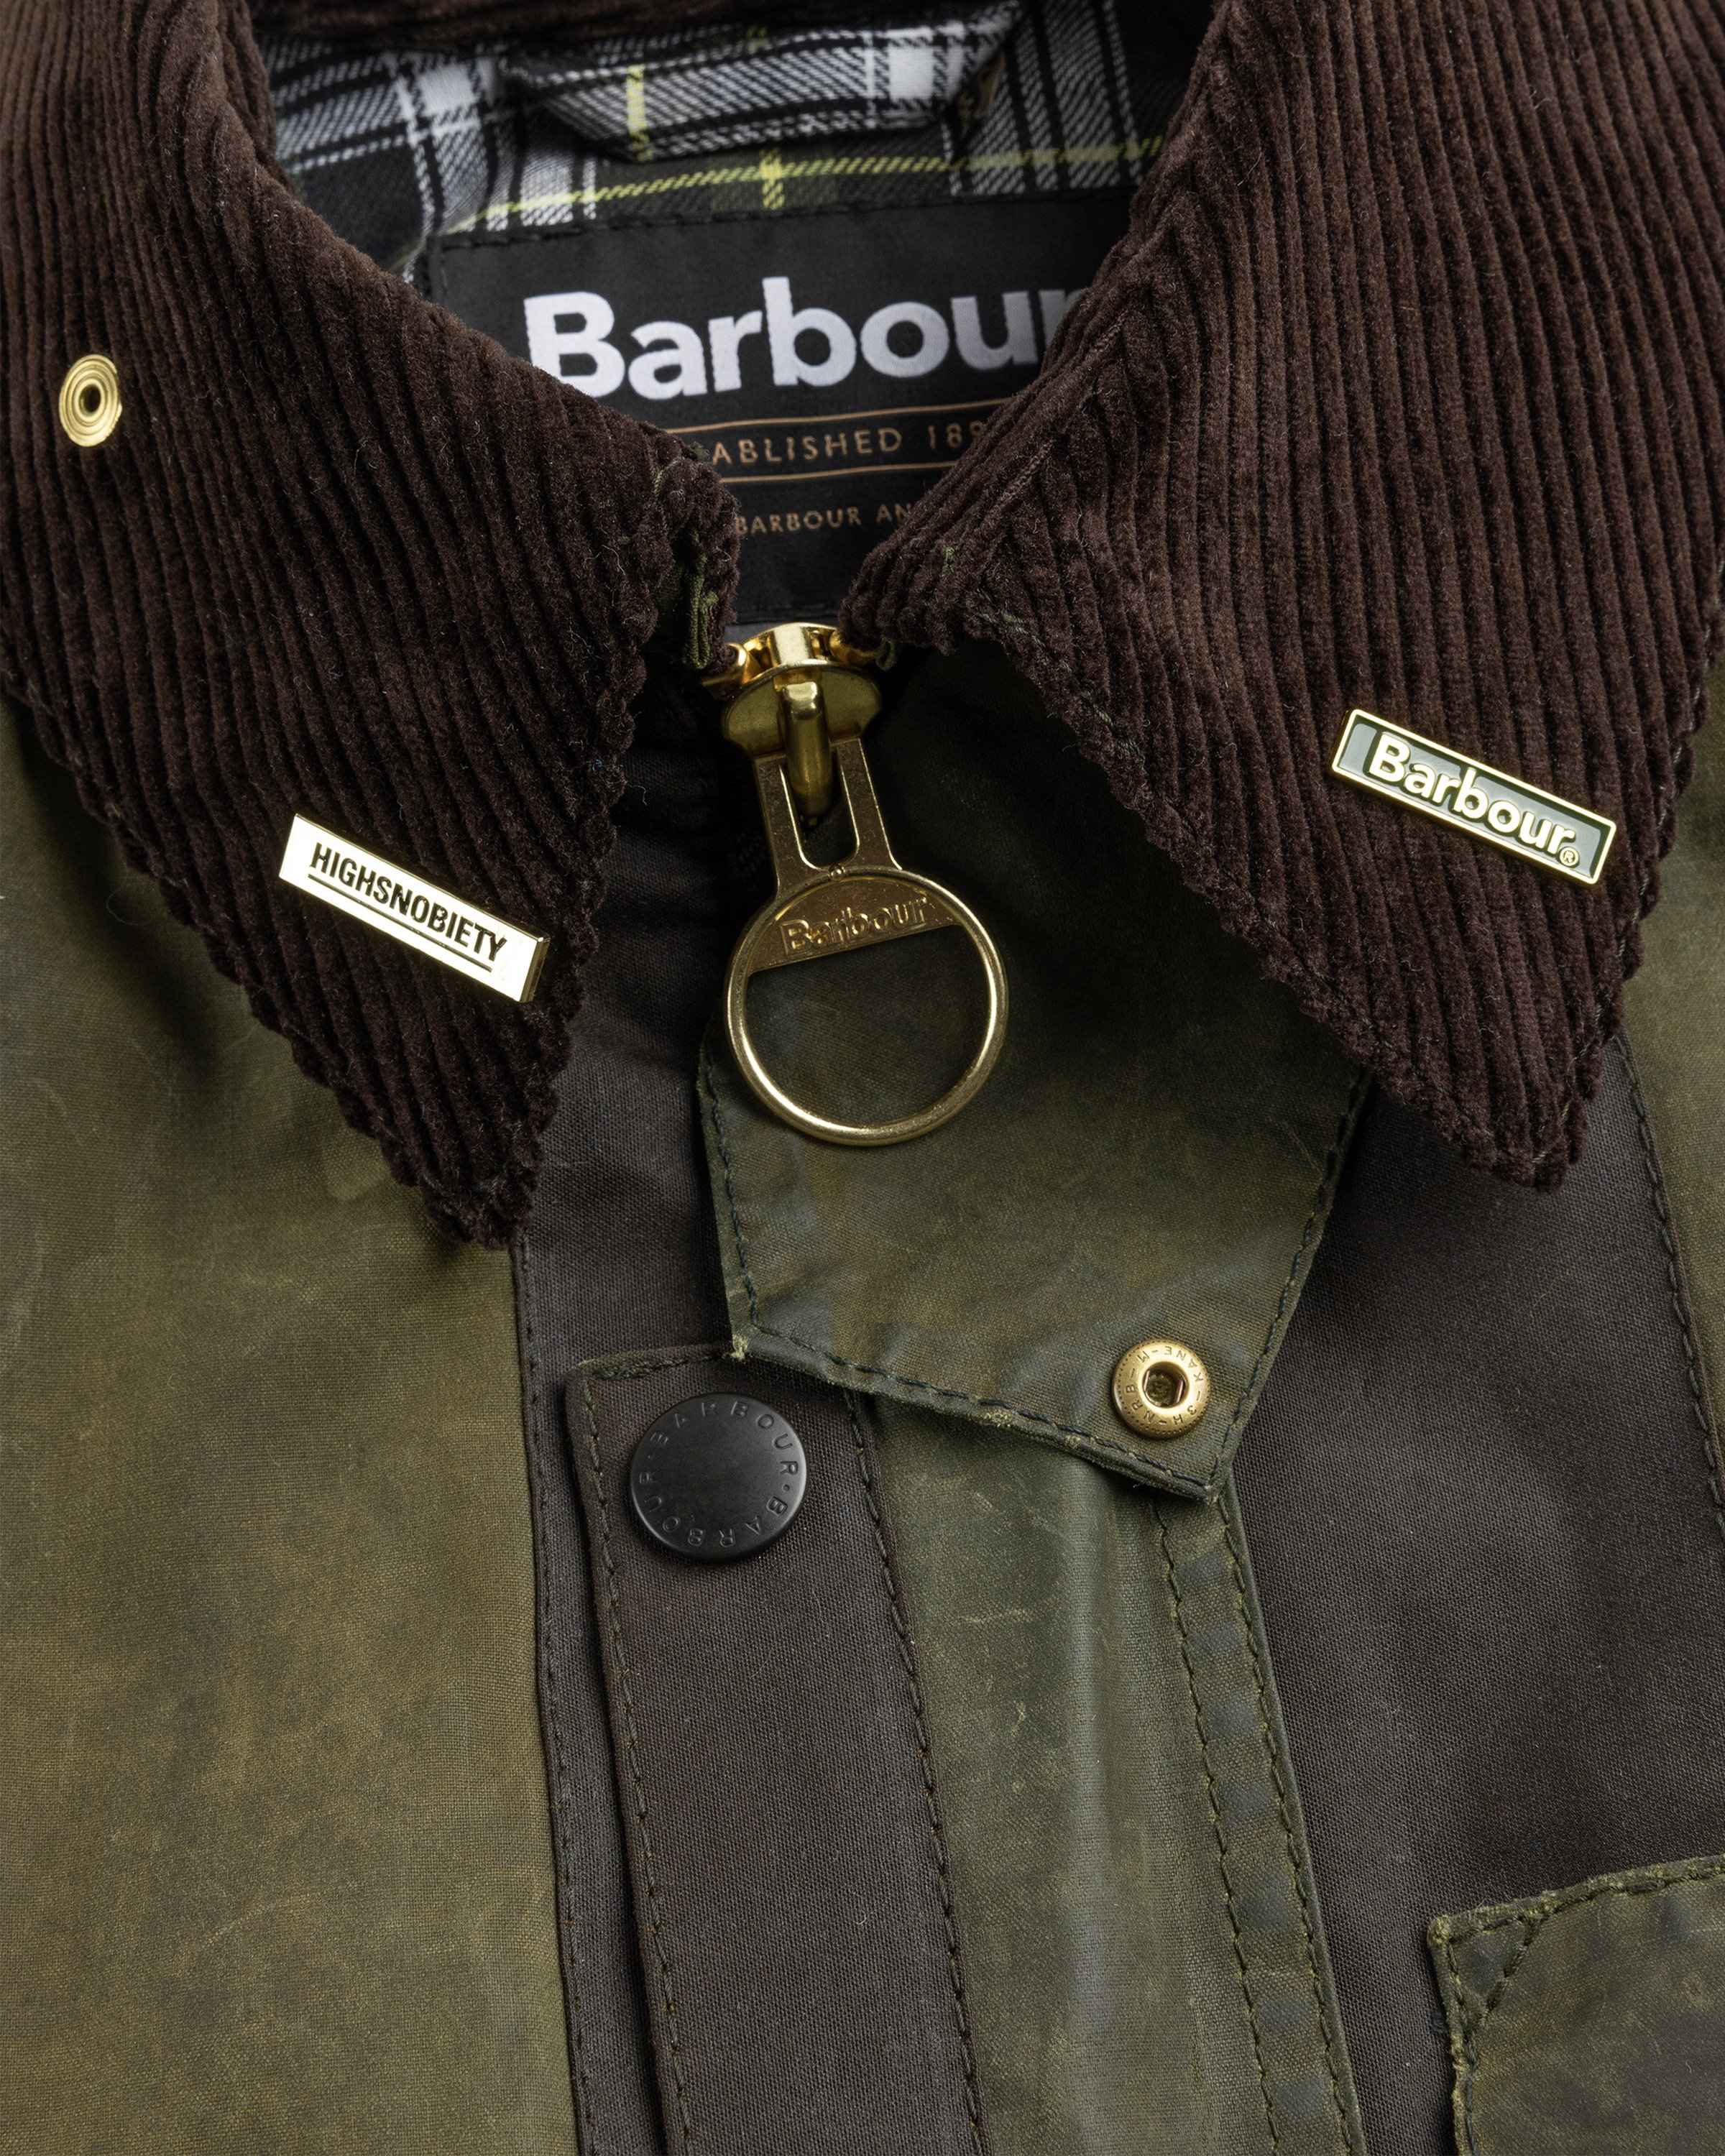 Barbour x Highsnobiety - Re-Loved Cropped Bedale Jacket 1 - 34 - Olive-Green - Clothing - Olive - Image 3